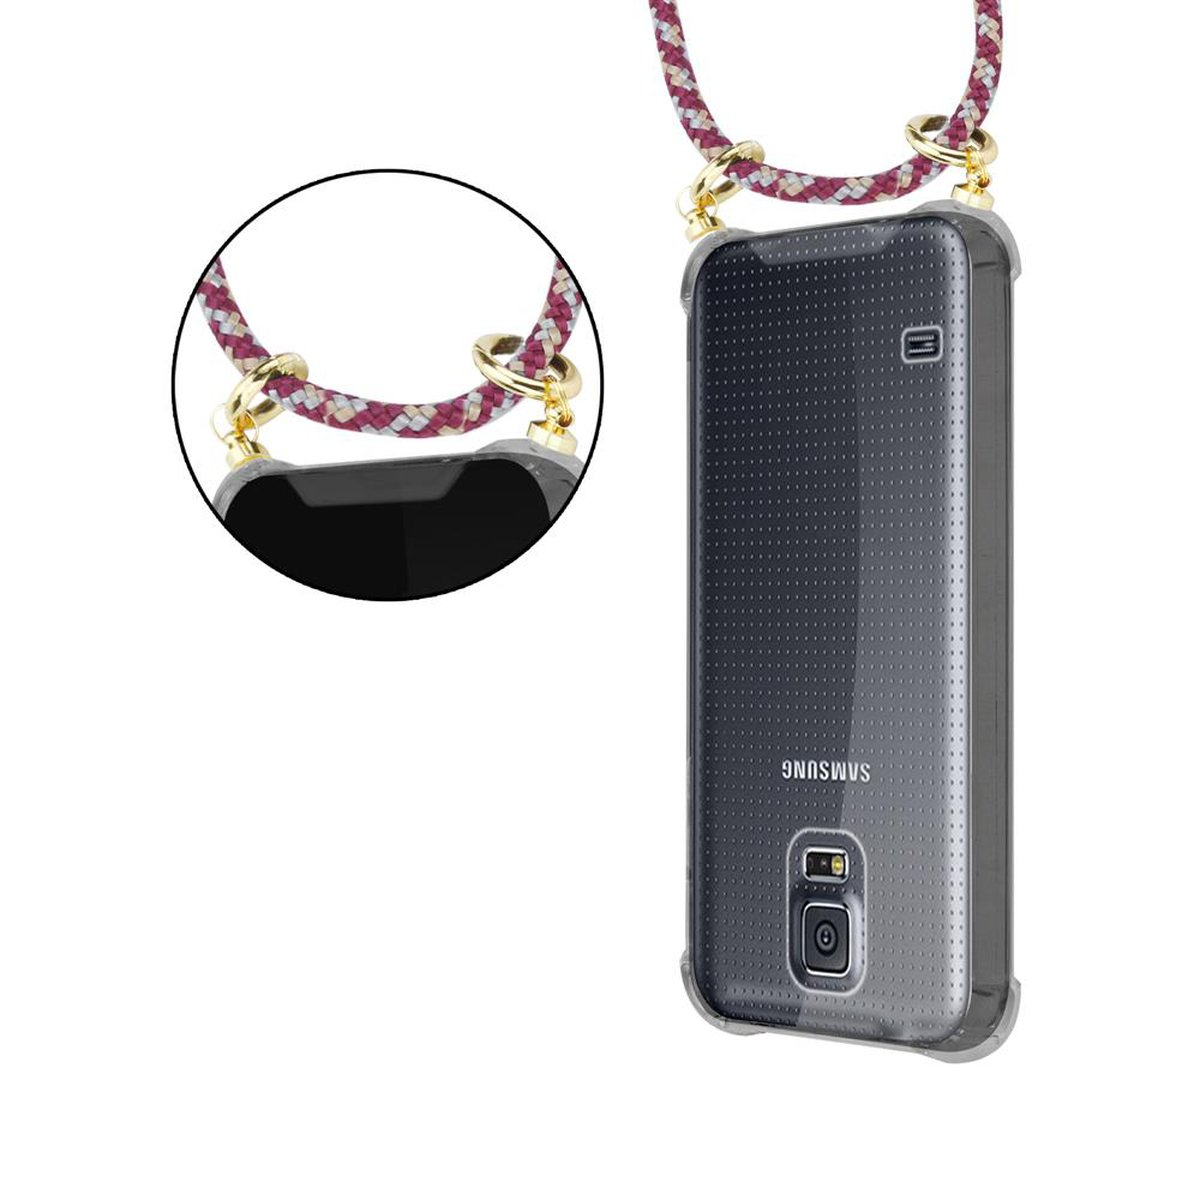 CADORABO Handy Kette mit Gold WEIß S5 Galaxy S5 NEO, Hülle, Kordel Samsung, ROT und Band abnehmbarer / Backcover, GELB Ringen